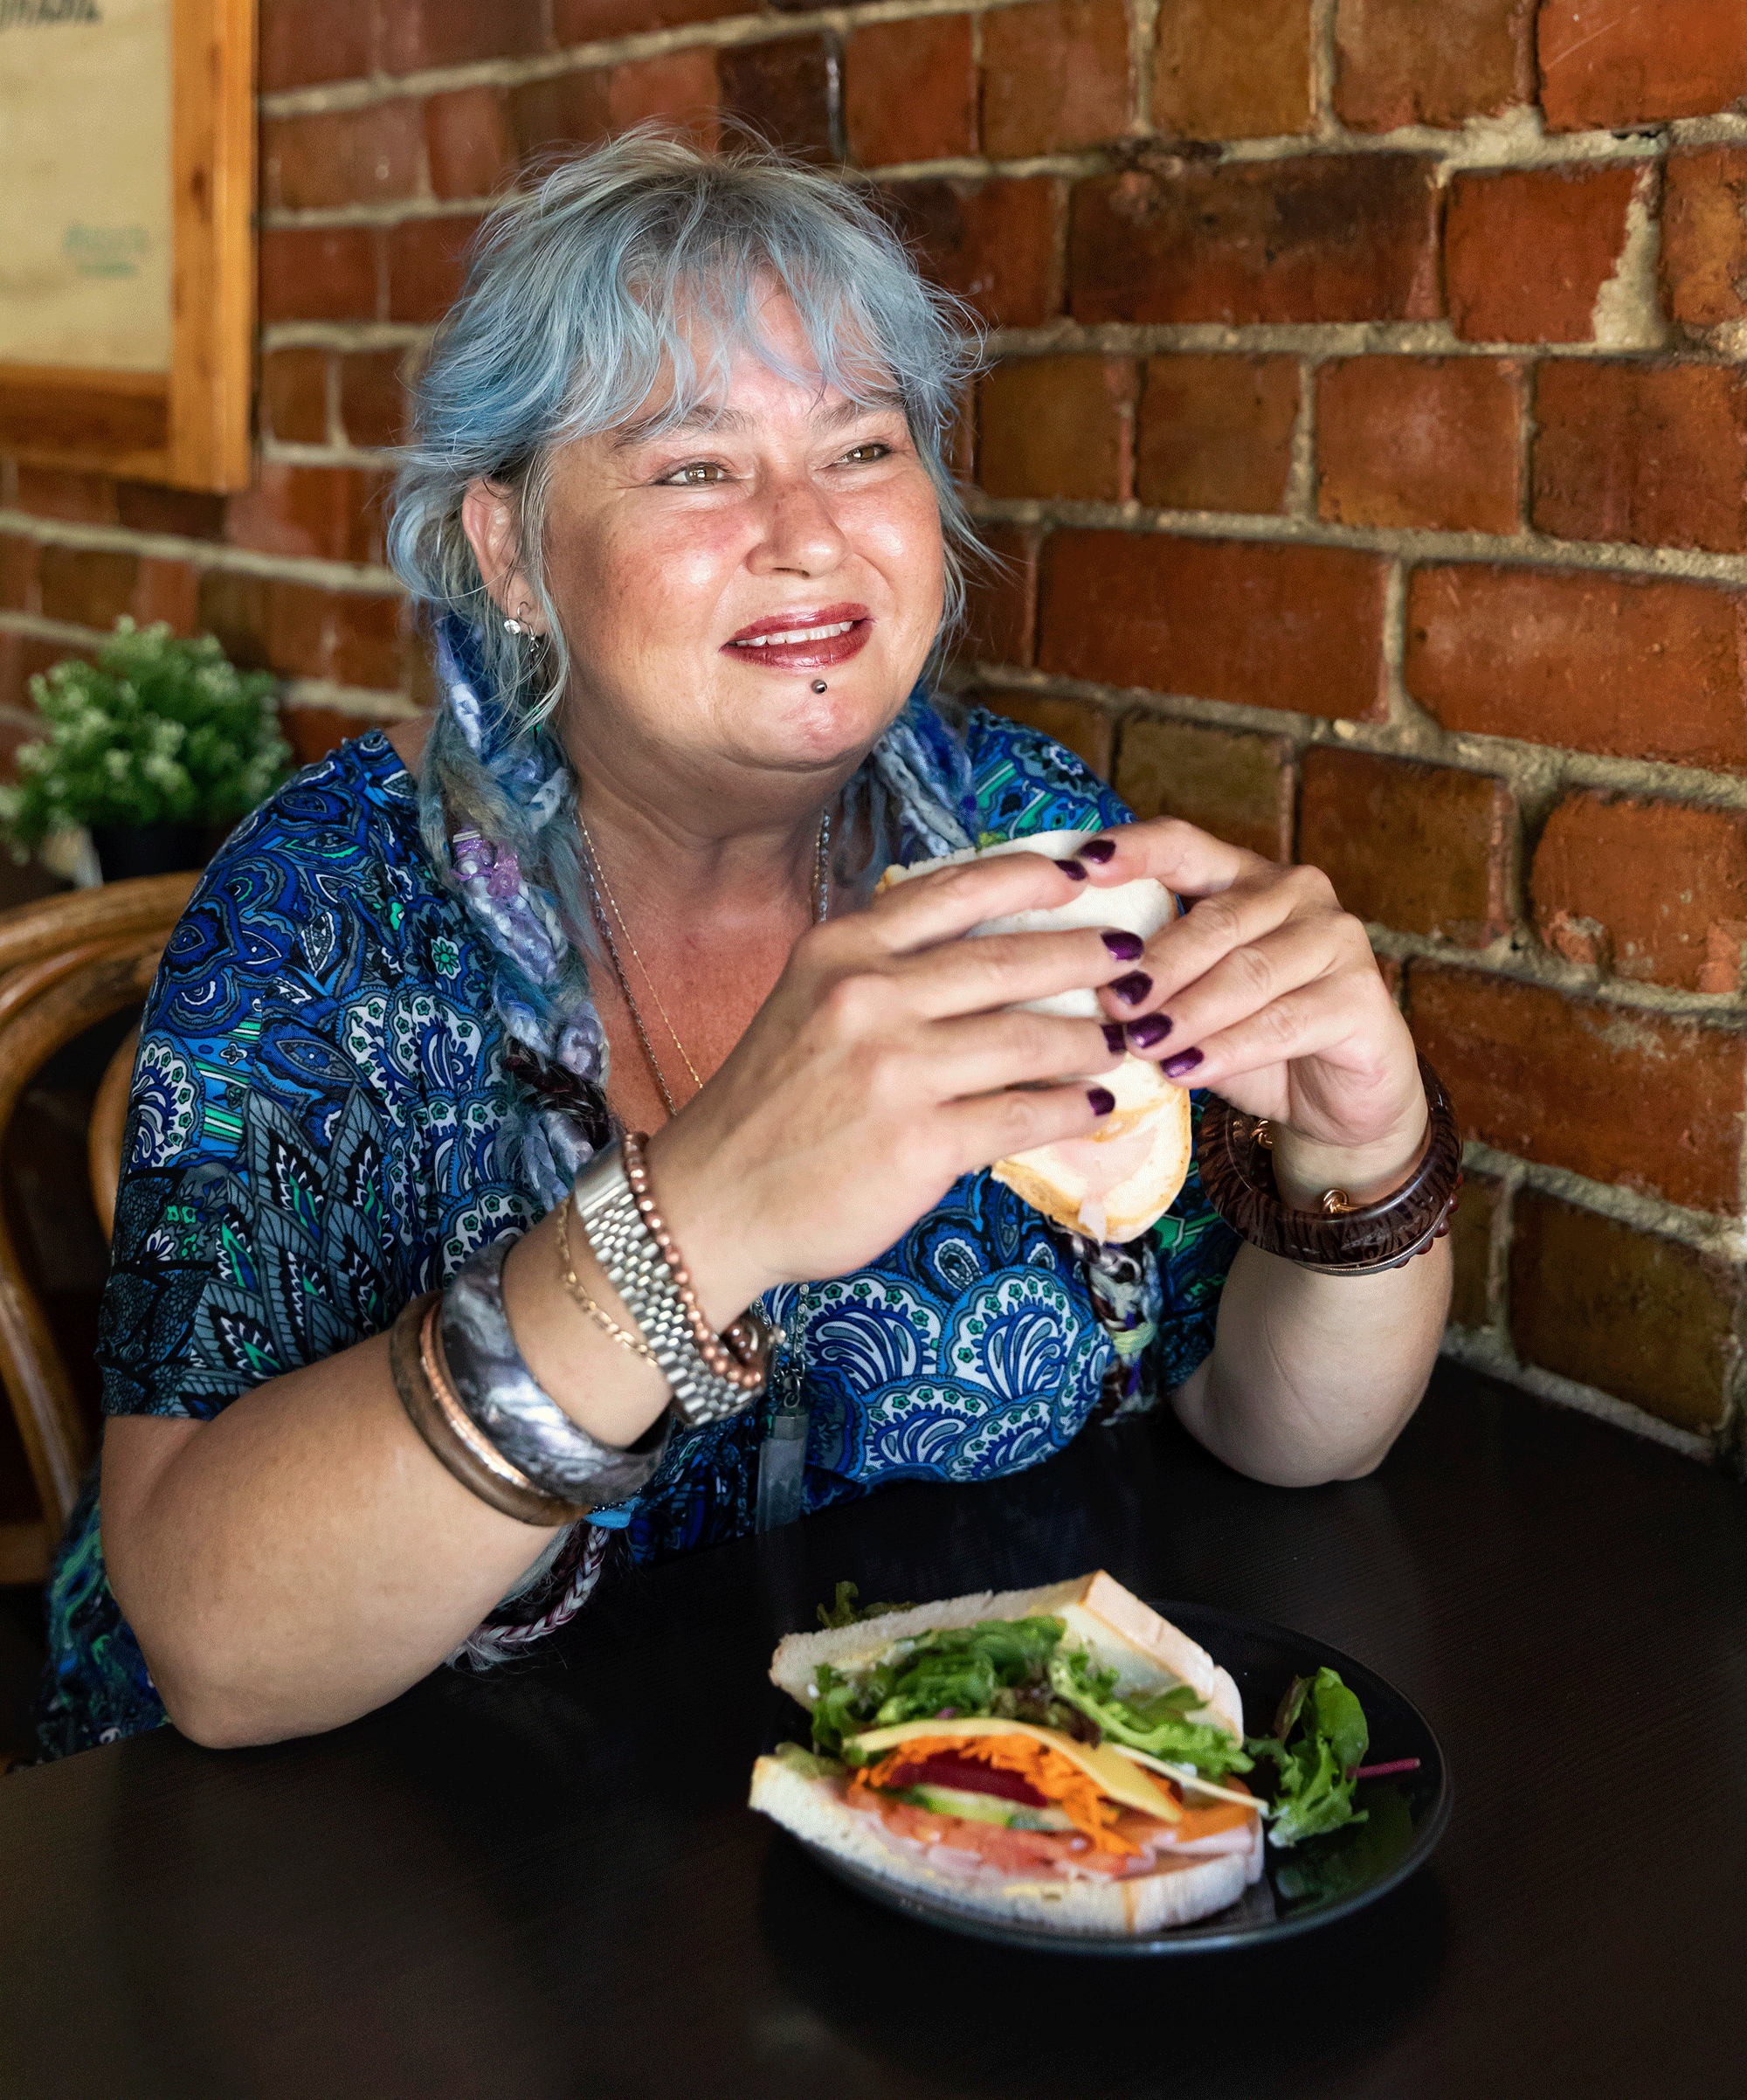 A woman in a cafe smiling and holding a sandwhich